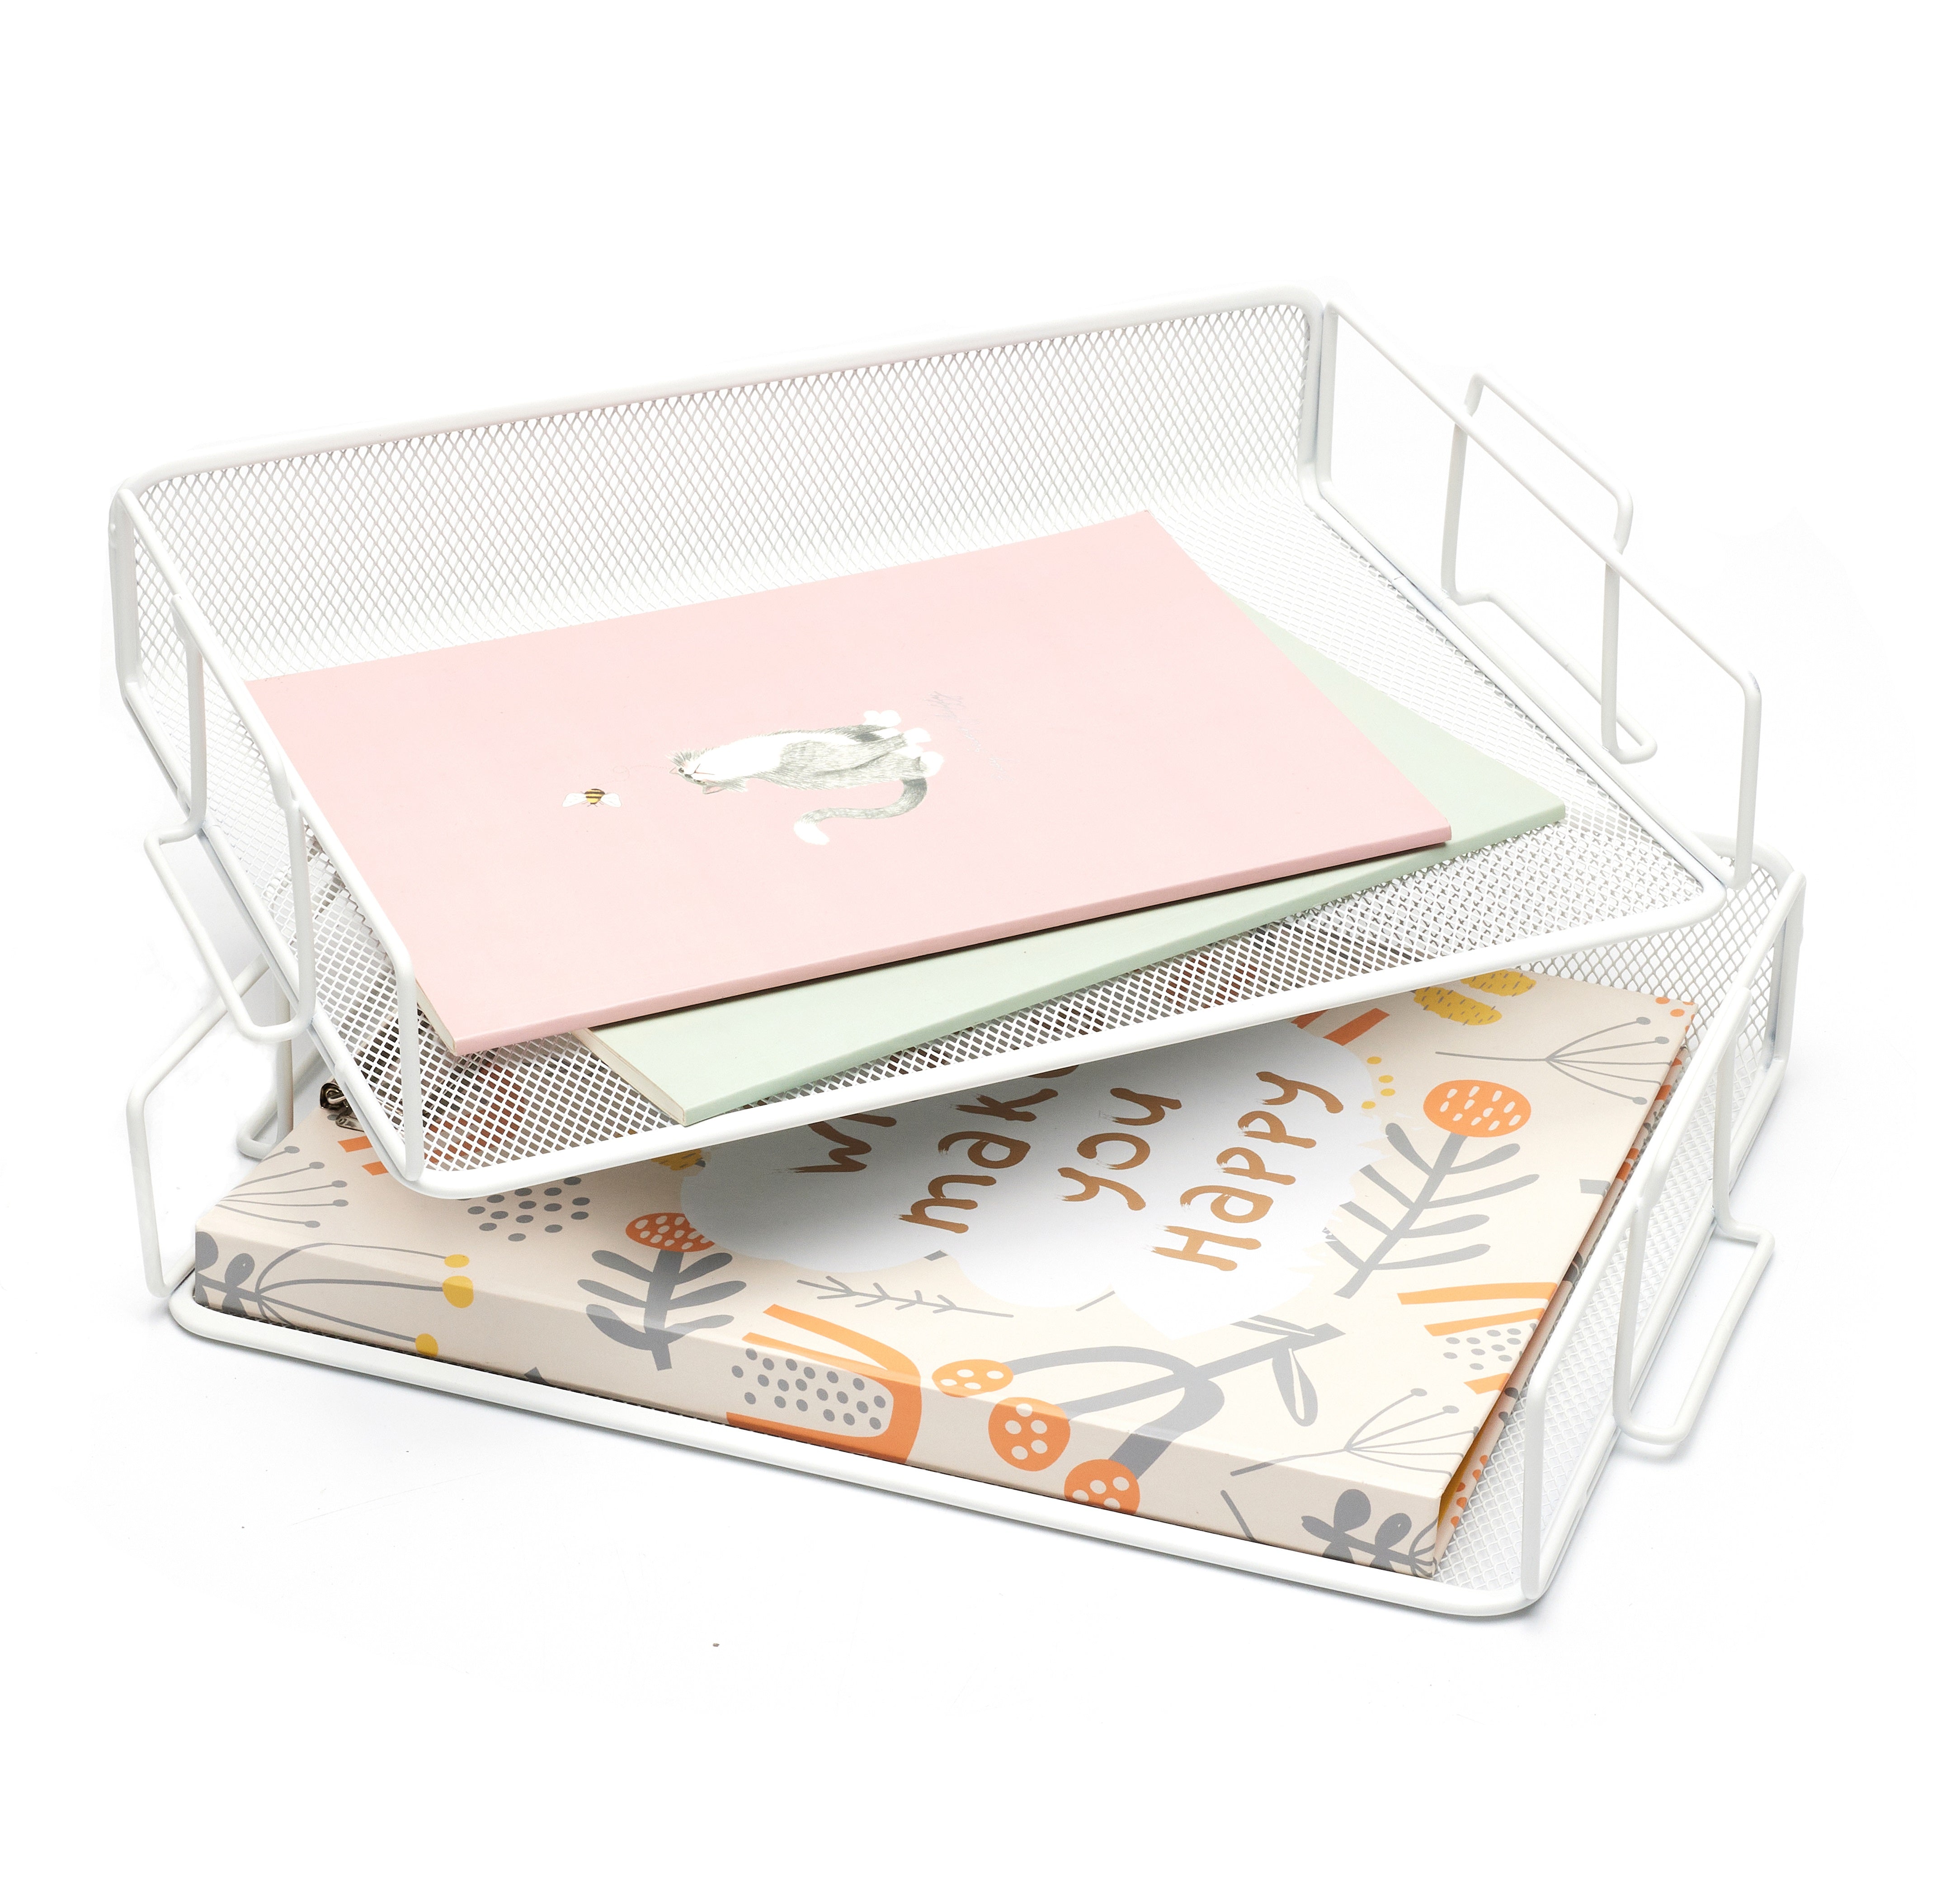 Exerz Letter Trays 2pcs - Stackable Paper Sorter File Trays - White